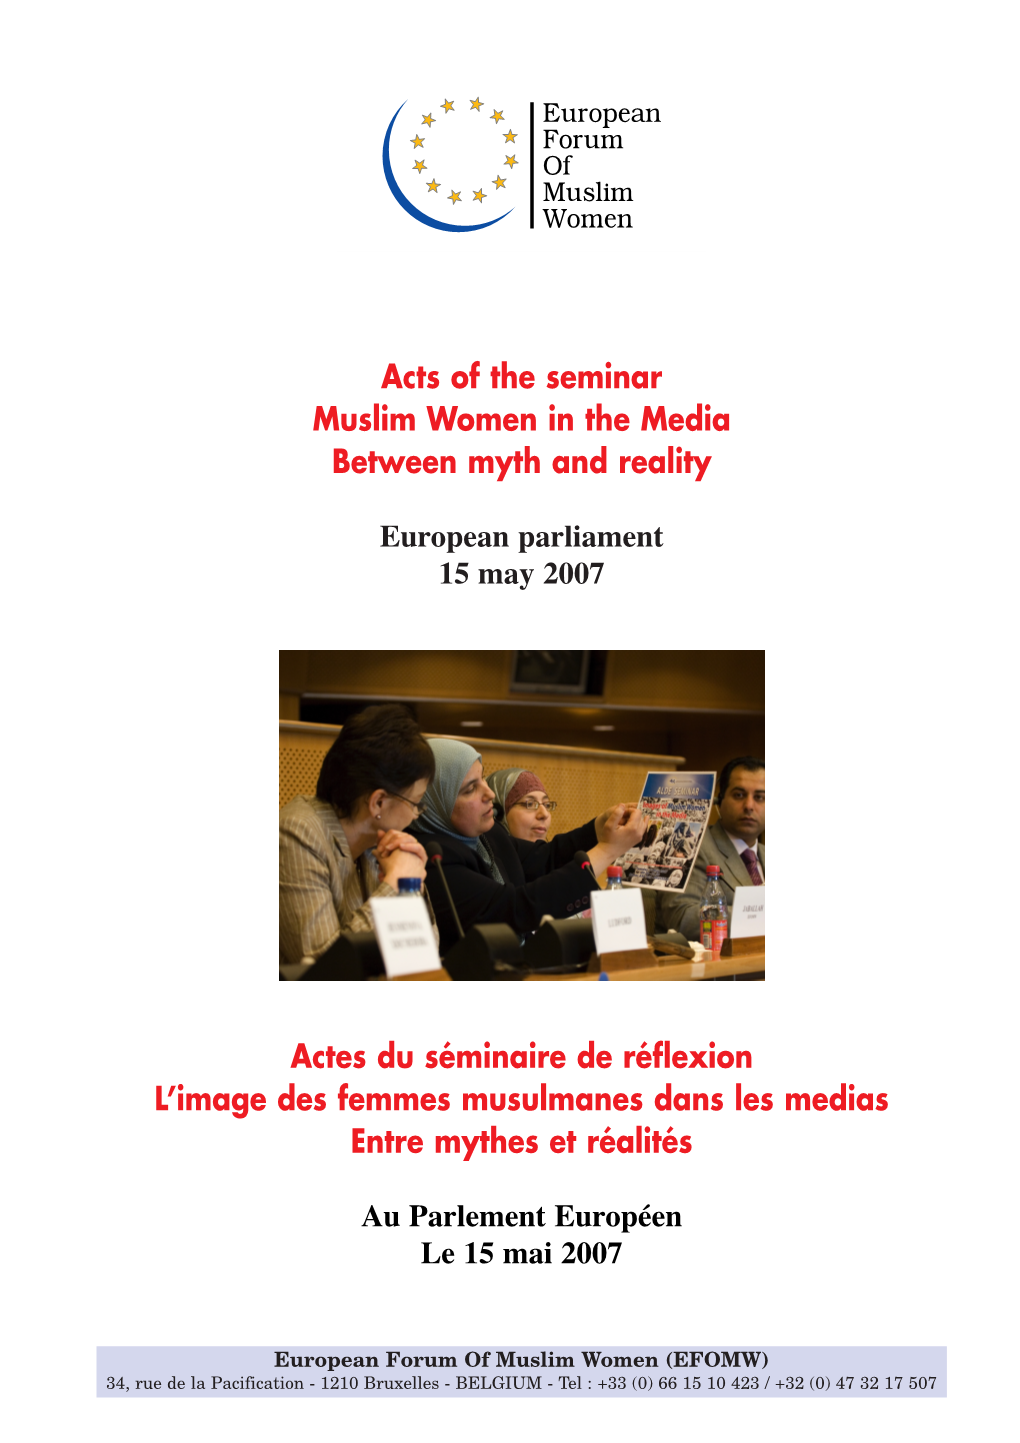 Acts of the Seminar Muslim Women in the Media Between Myth and Reality